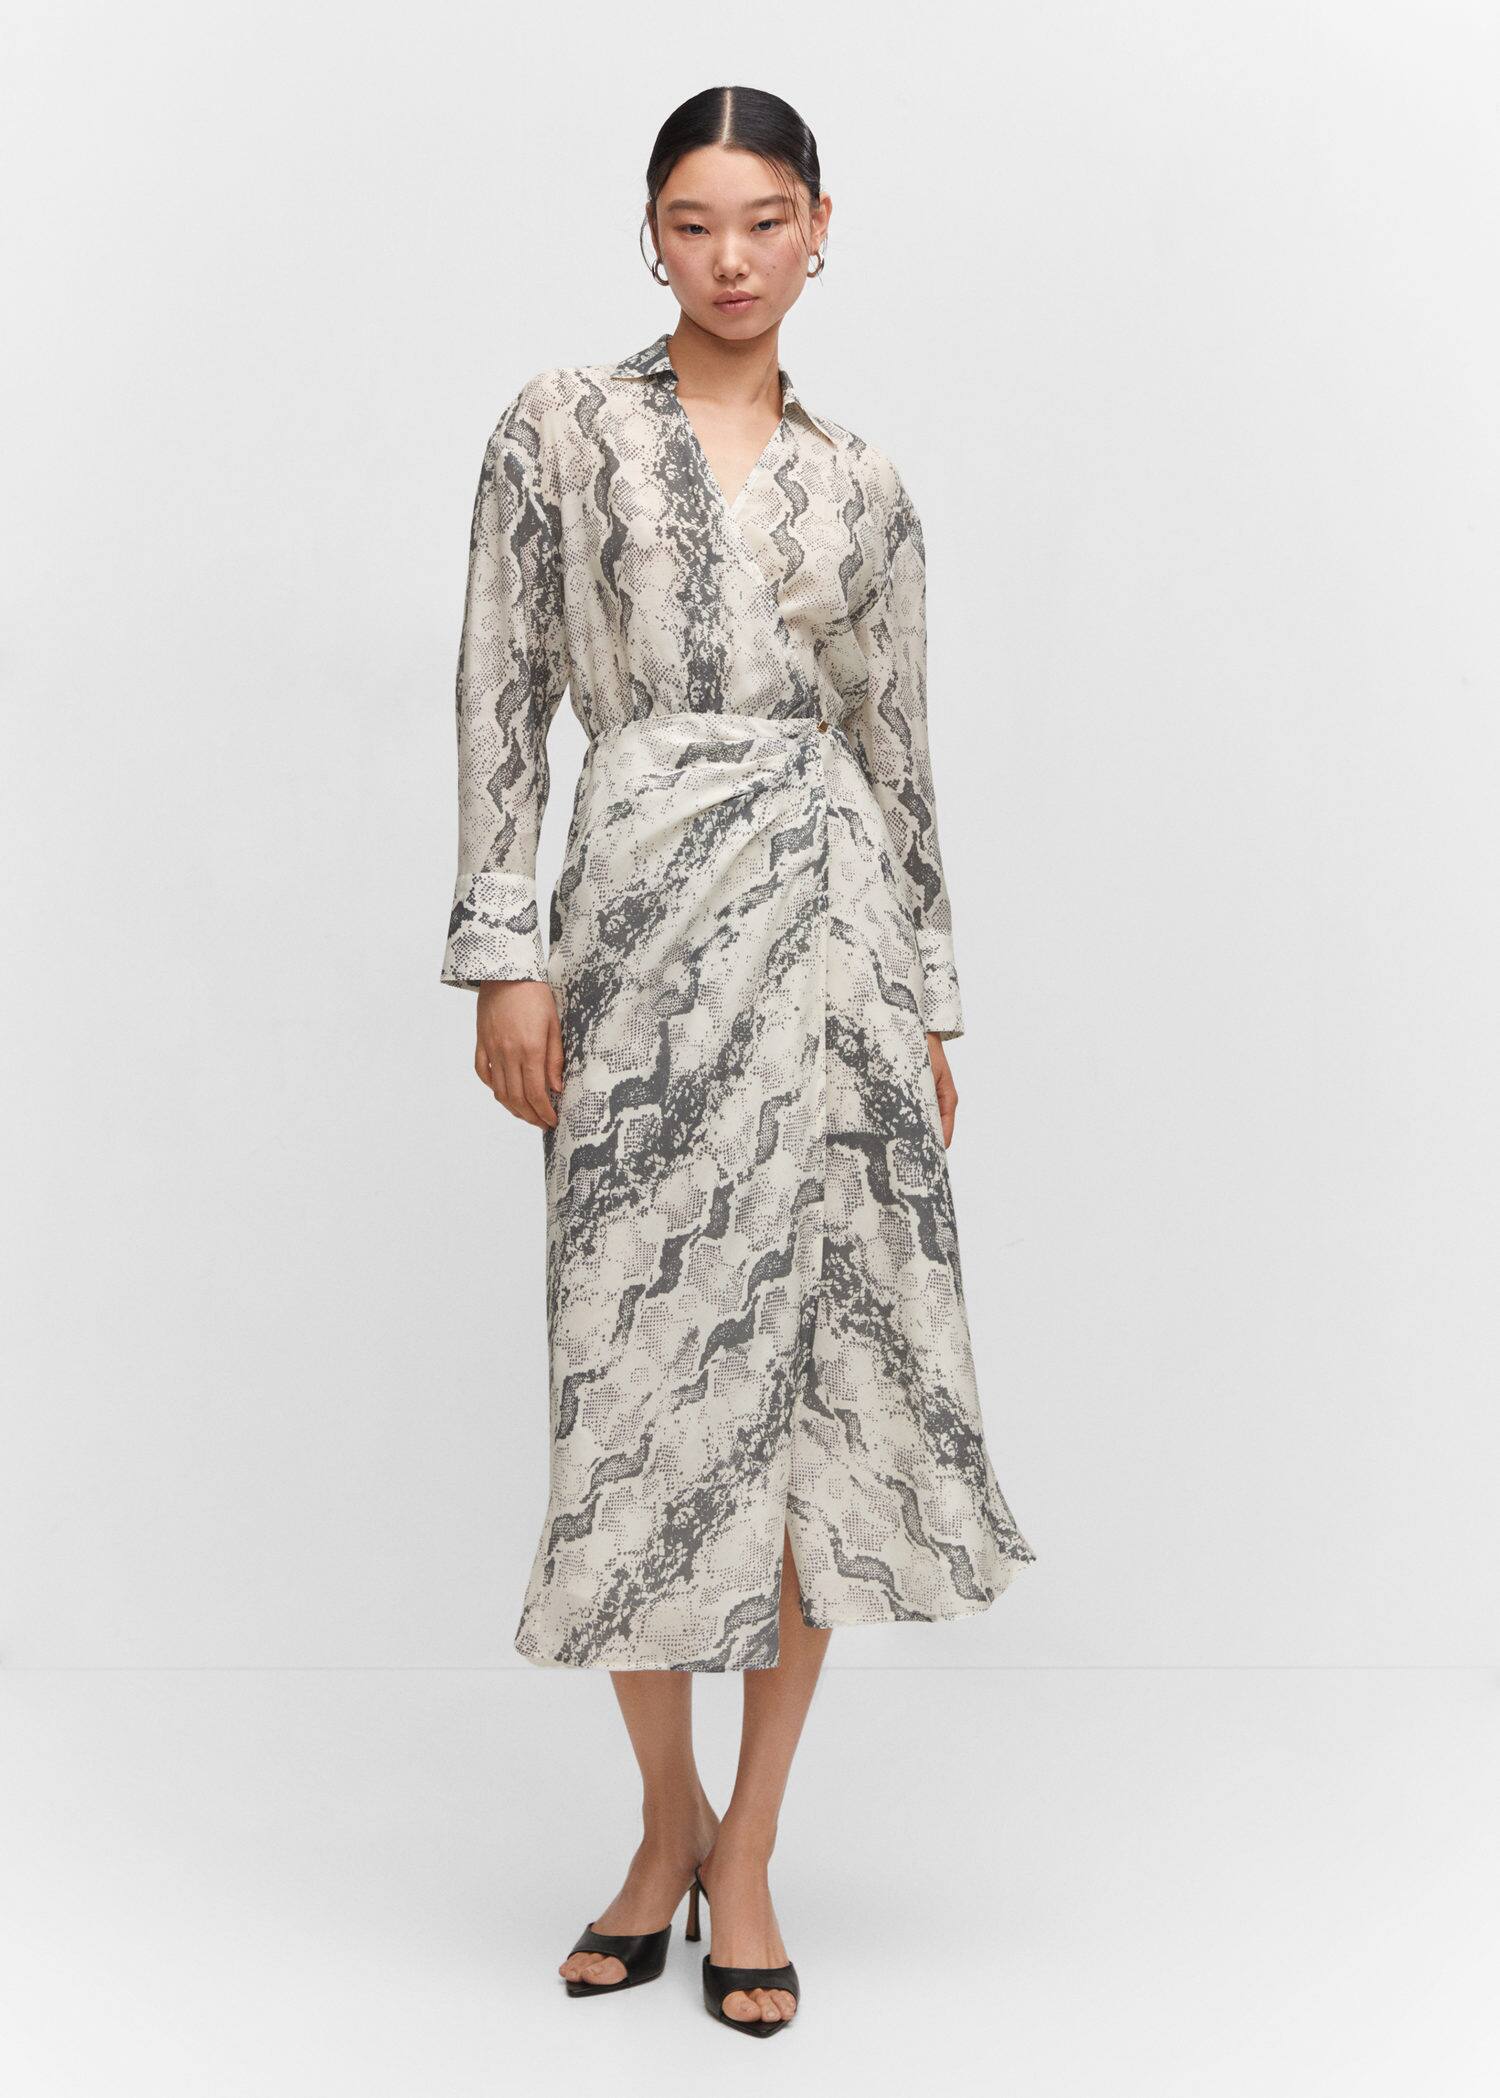 Mango Animal Print Long Dress That We Can Wear With Ankle Boots